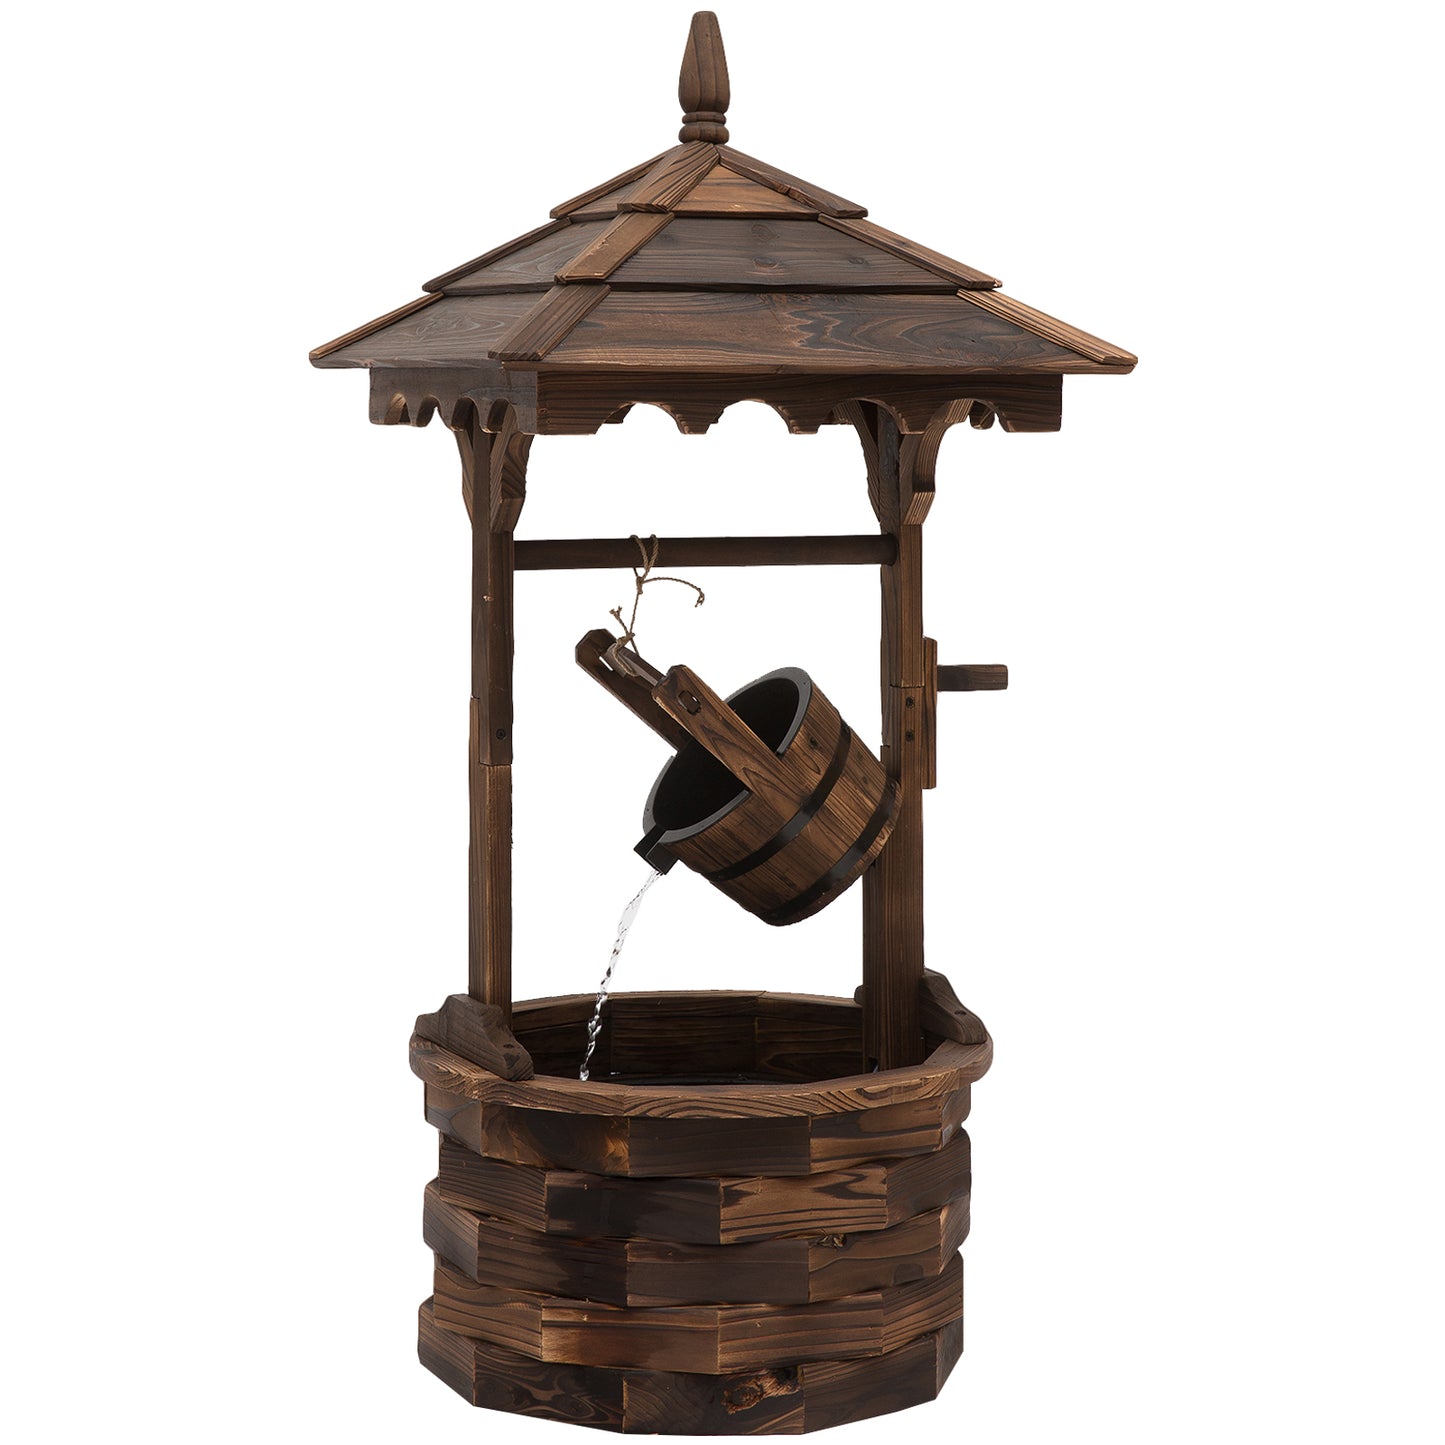 Outsunny Wooden Garden Wishing Well Fountain Barrel Waterfall Rustic Wood with Pump Garden Décor Ornament